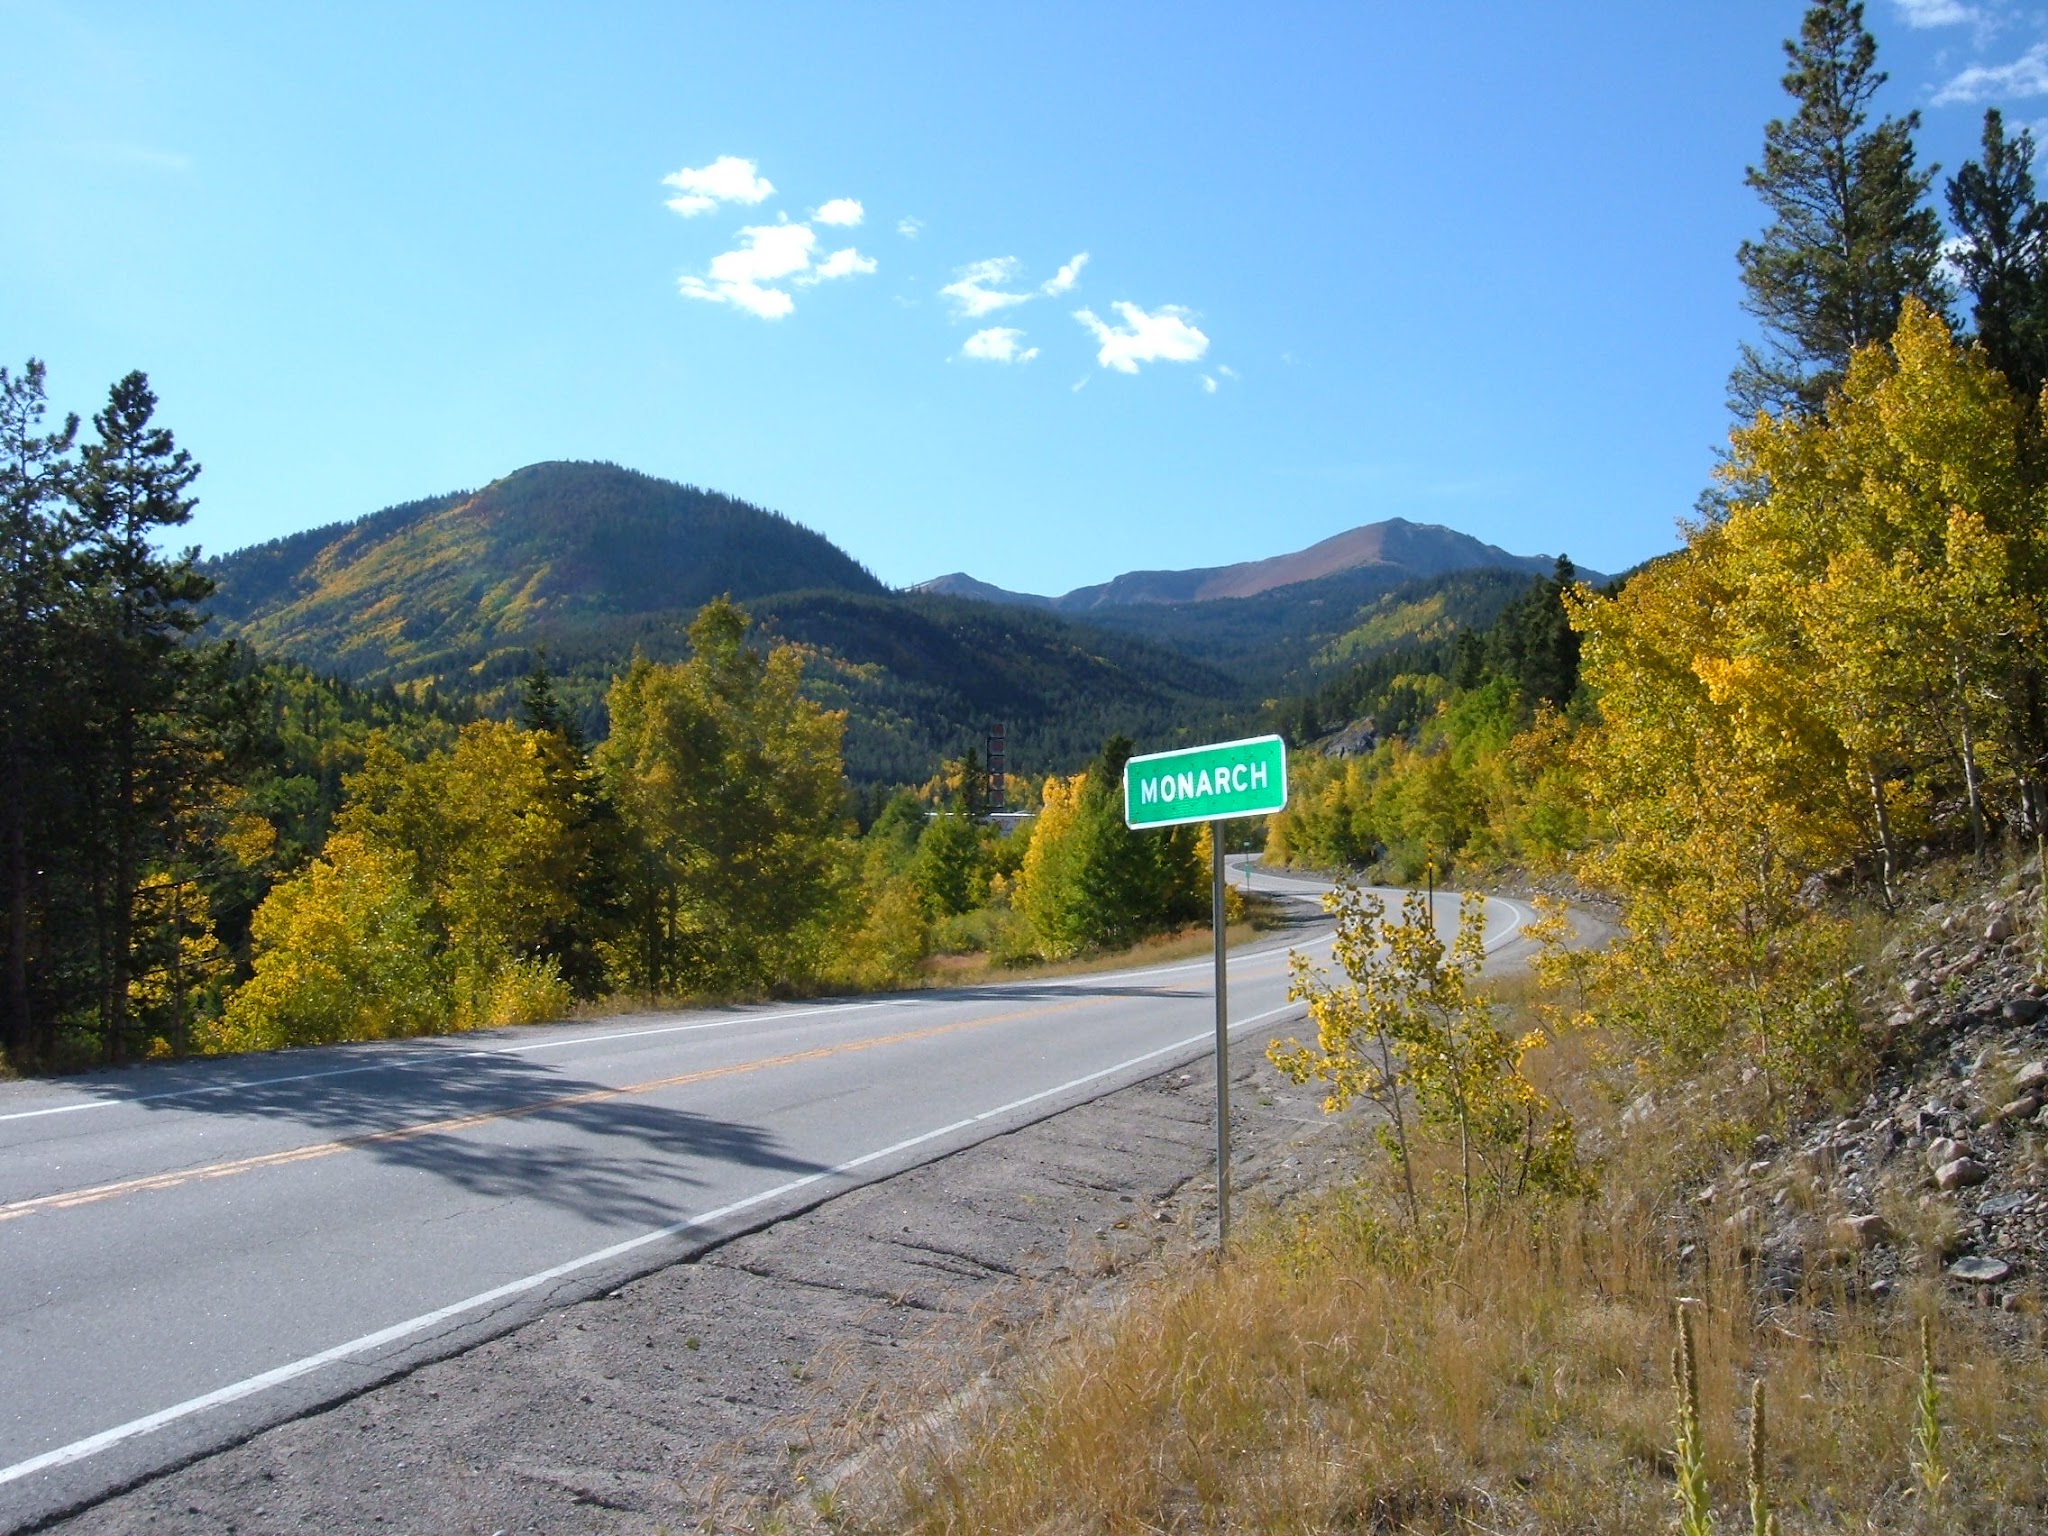 Highway sign along a mountain pass with fall colors on the Aspen trees.